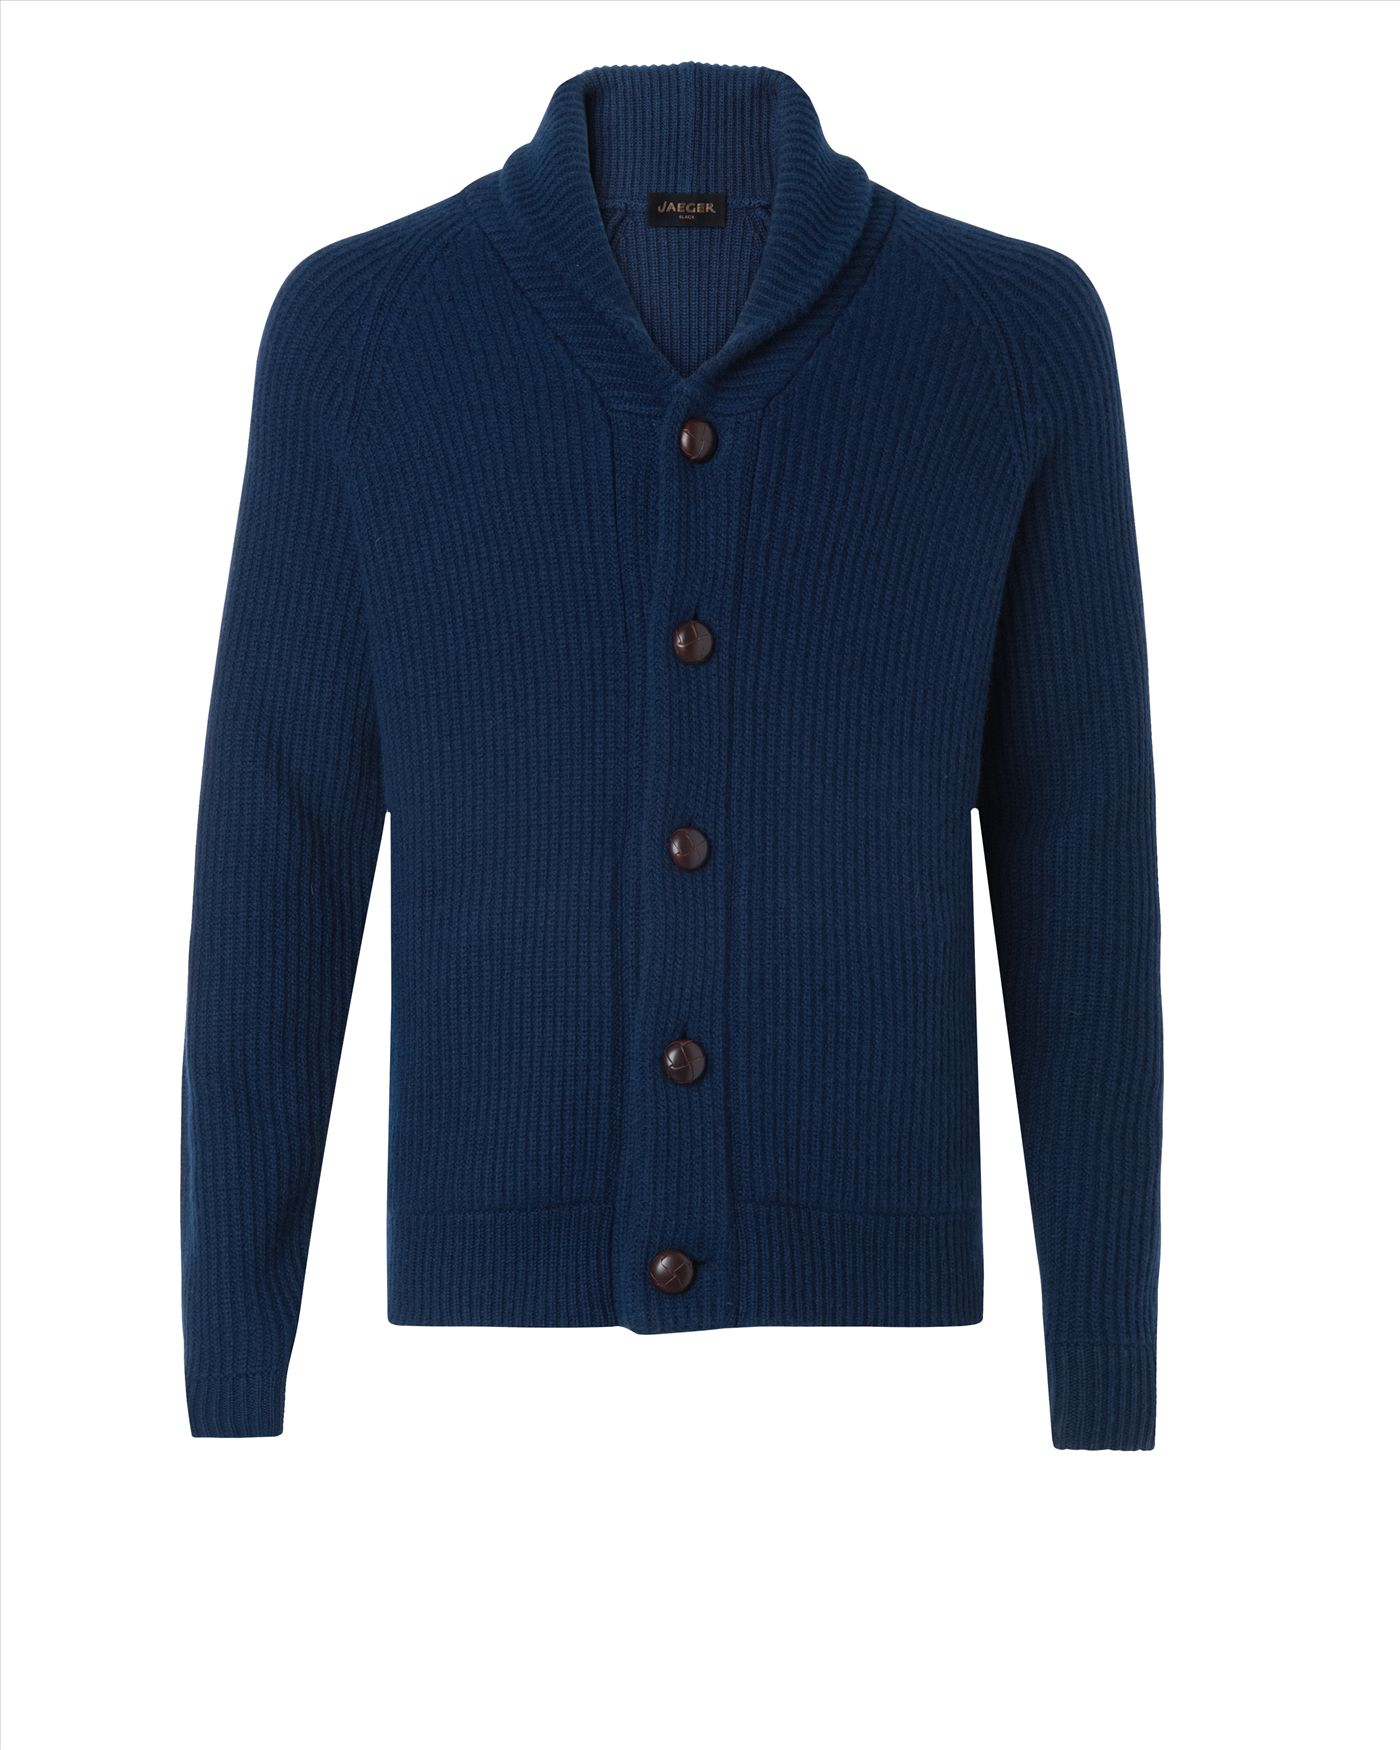 Lyst - Jaeger Cashmere Shawl Neck Cardigan in Blue for Men